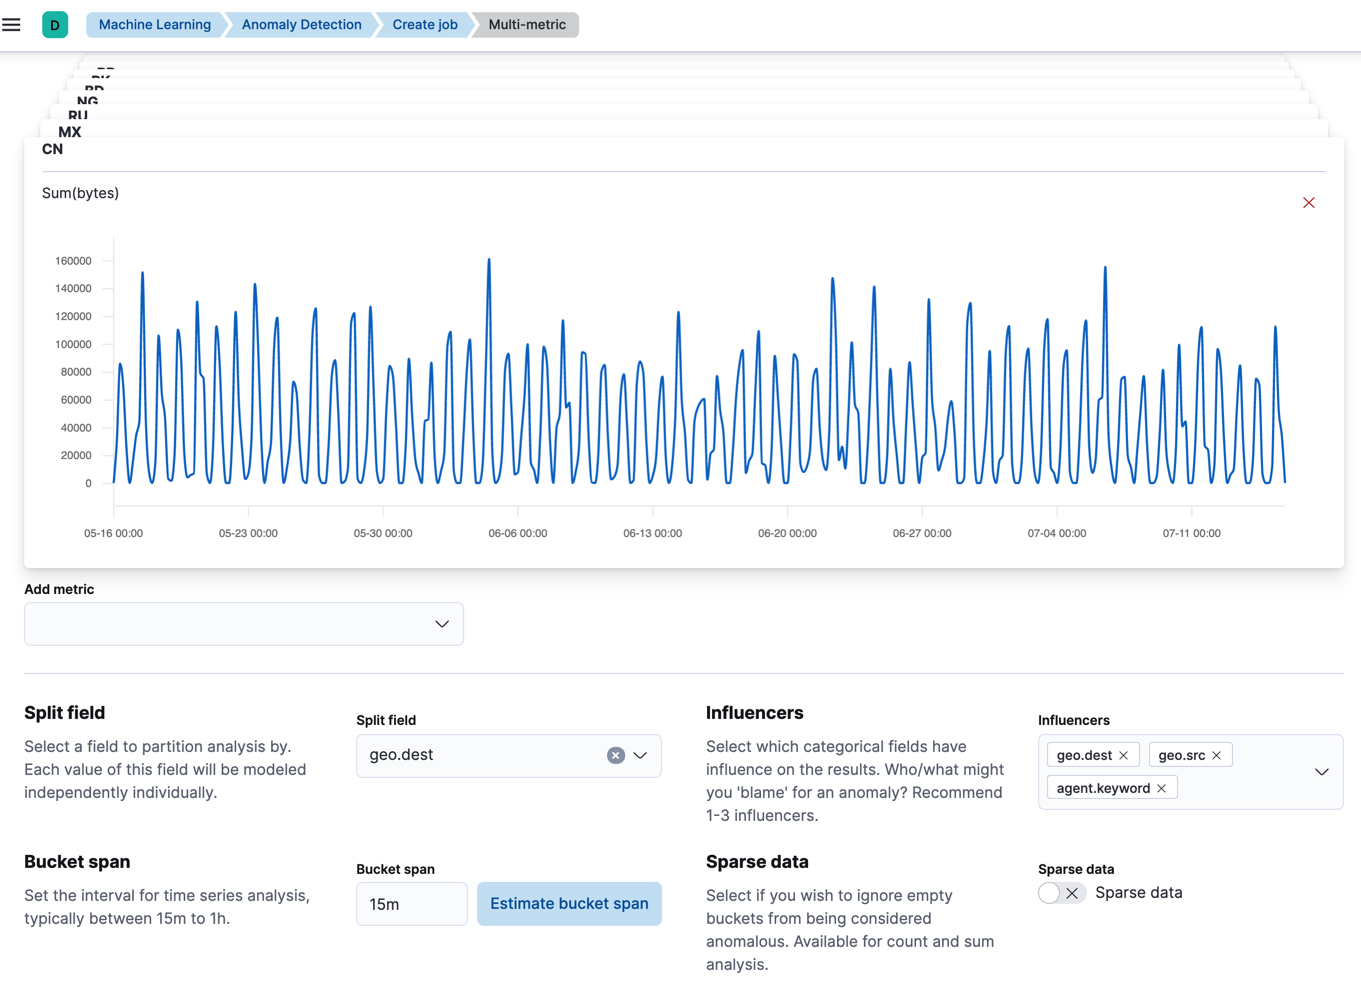 A screenshot of creating an anomaly detection job using the web logs data in Kibana